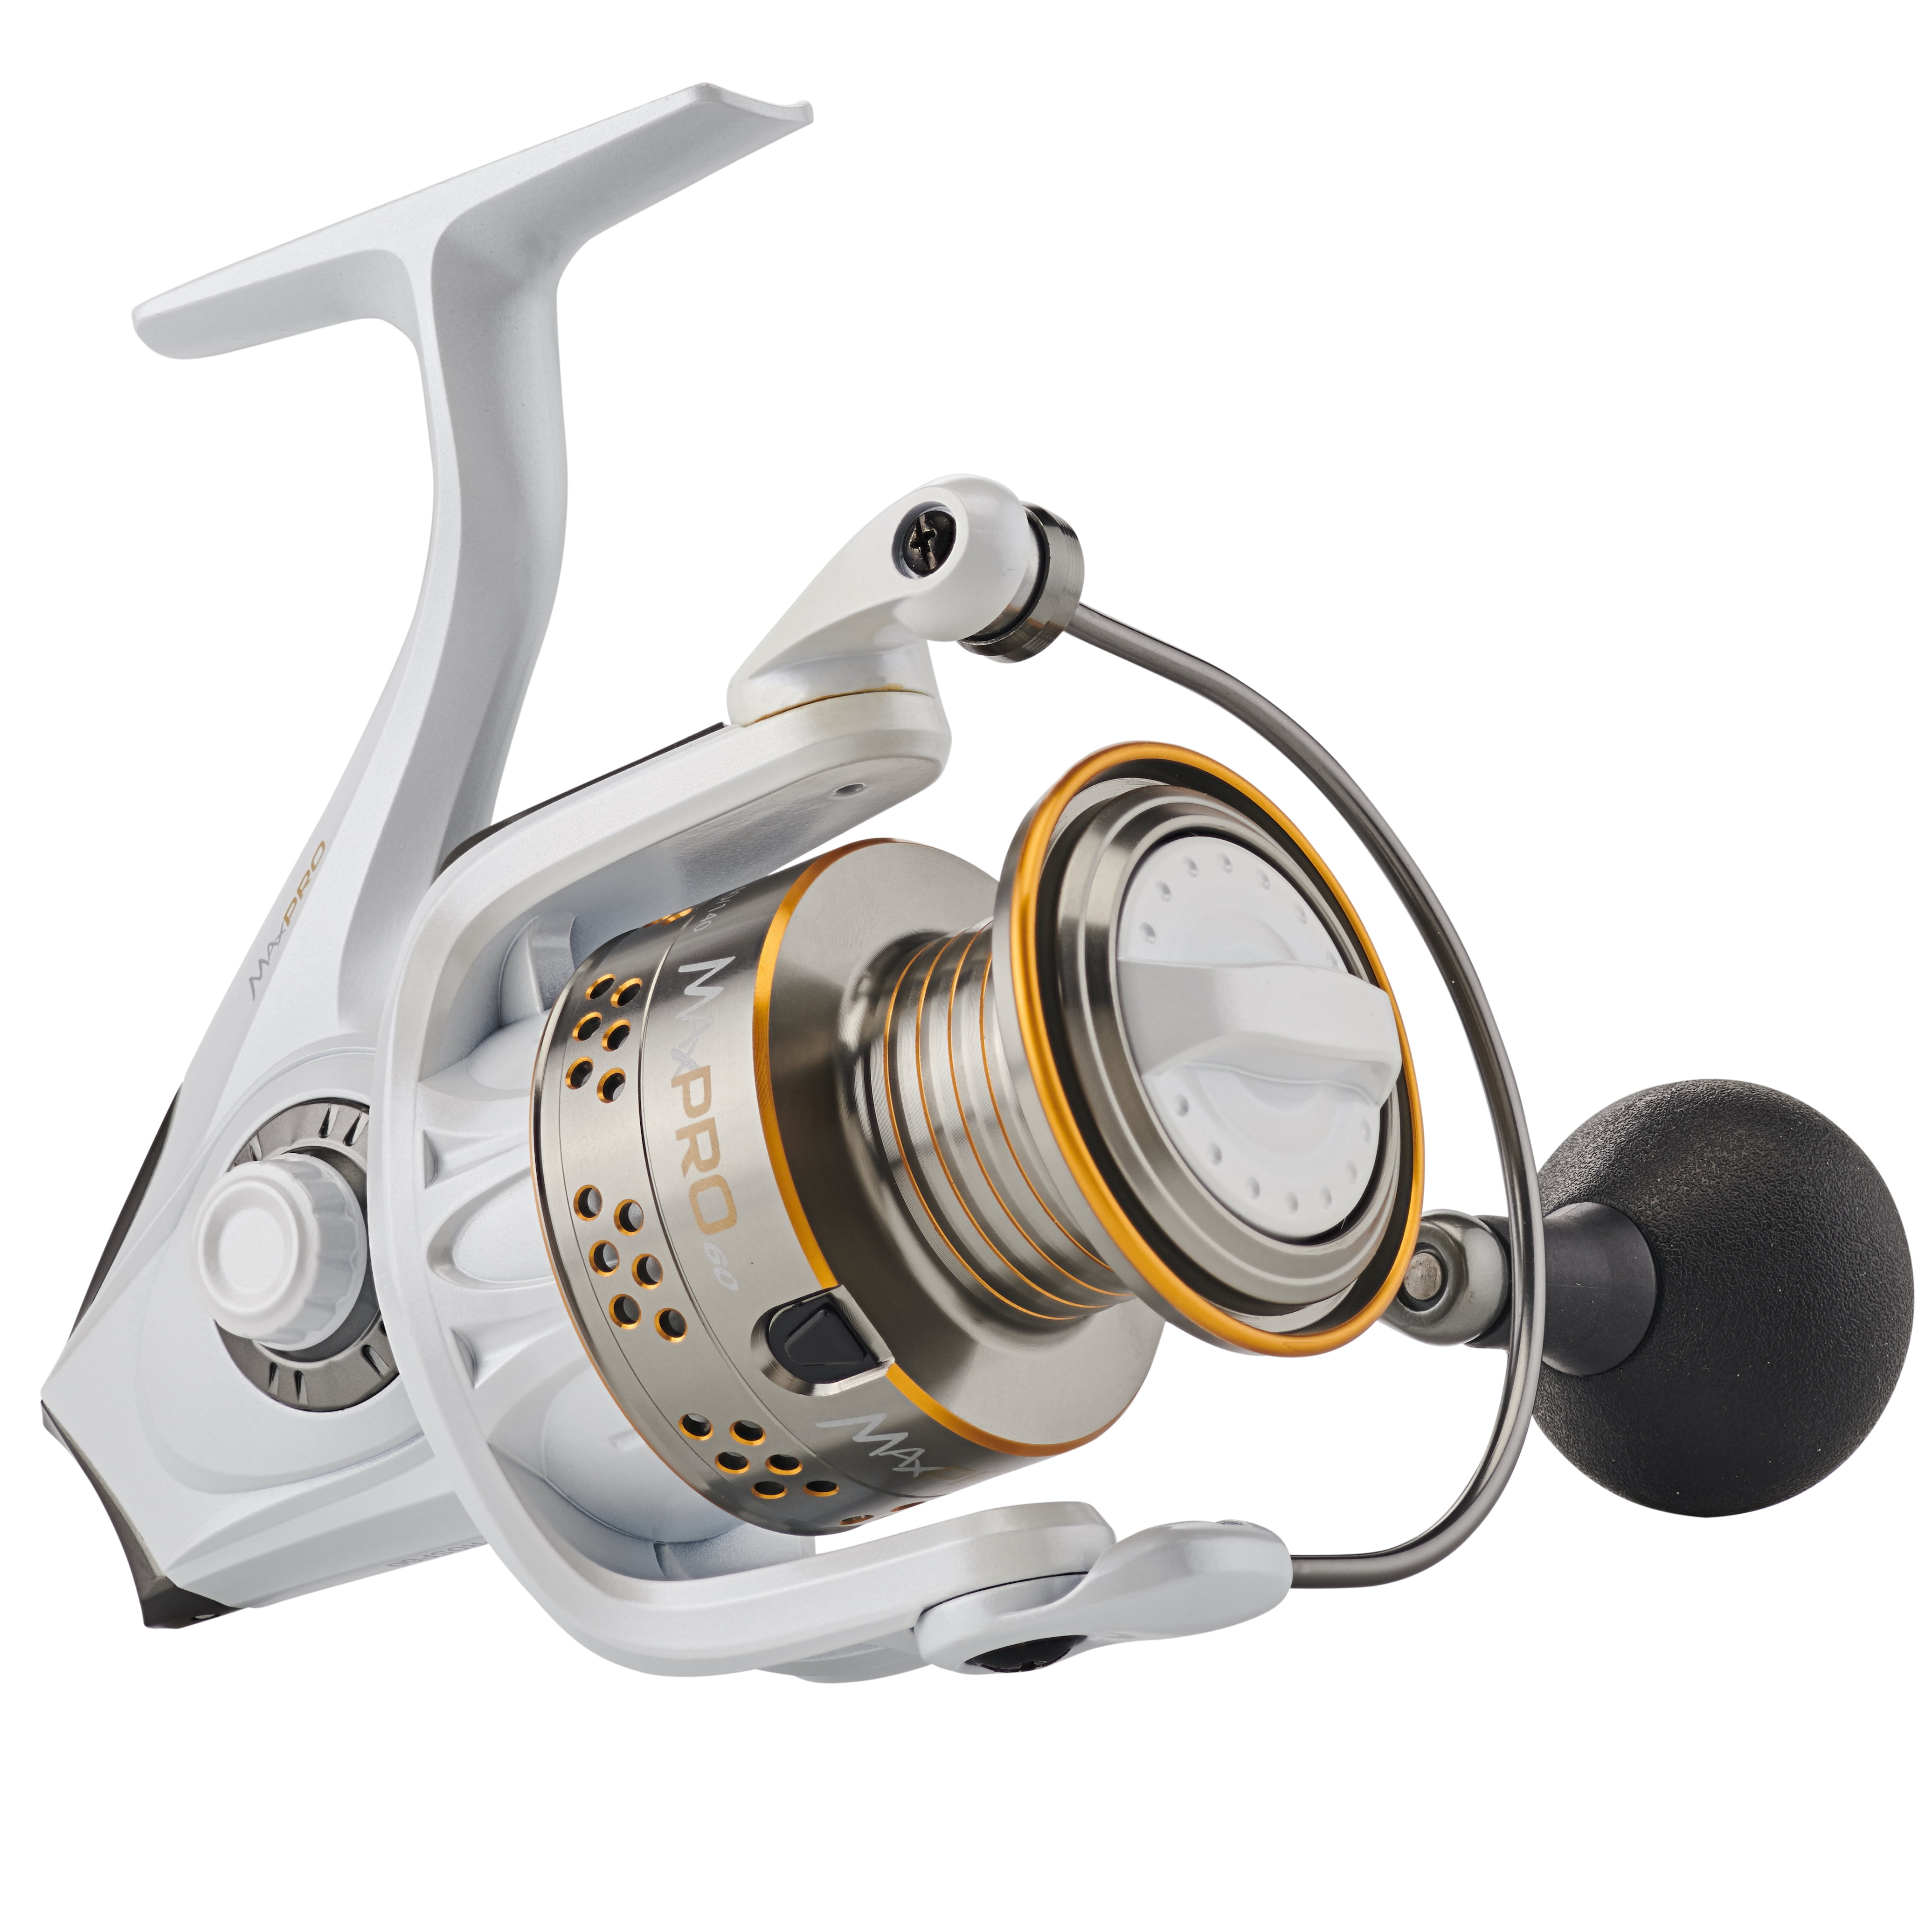 Details about   Abu Garcia Pro Max 60 spinning reel 